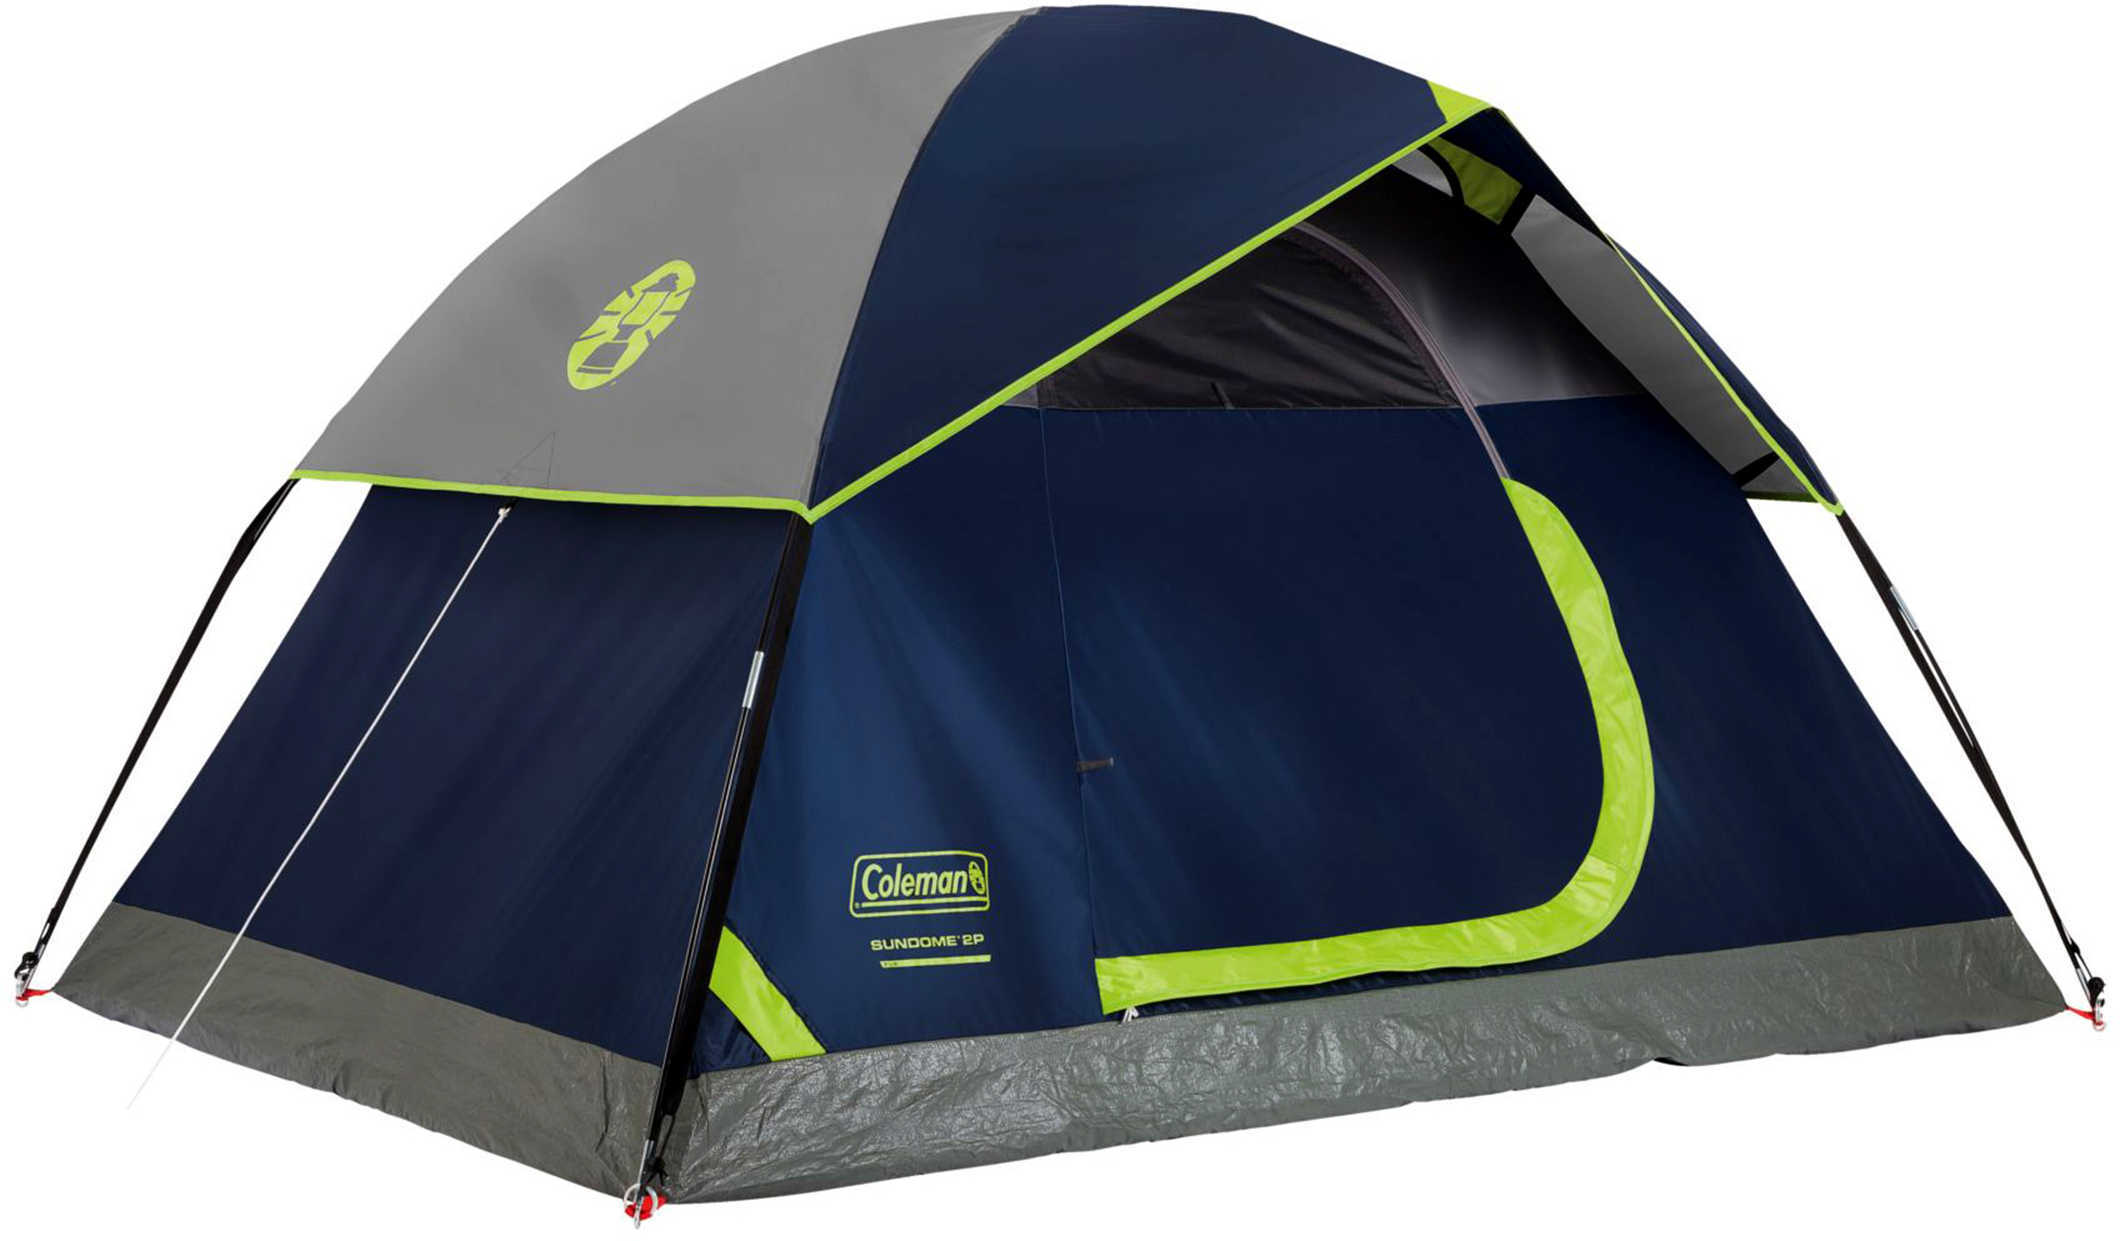 Coleman Sundome Tent 3 Person 7 x Navy/Gray Md: 2000024580